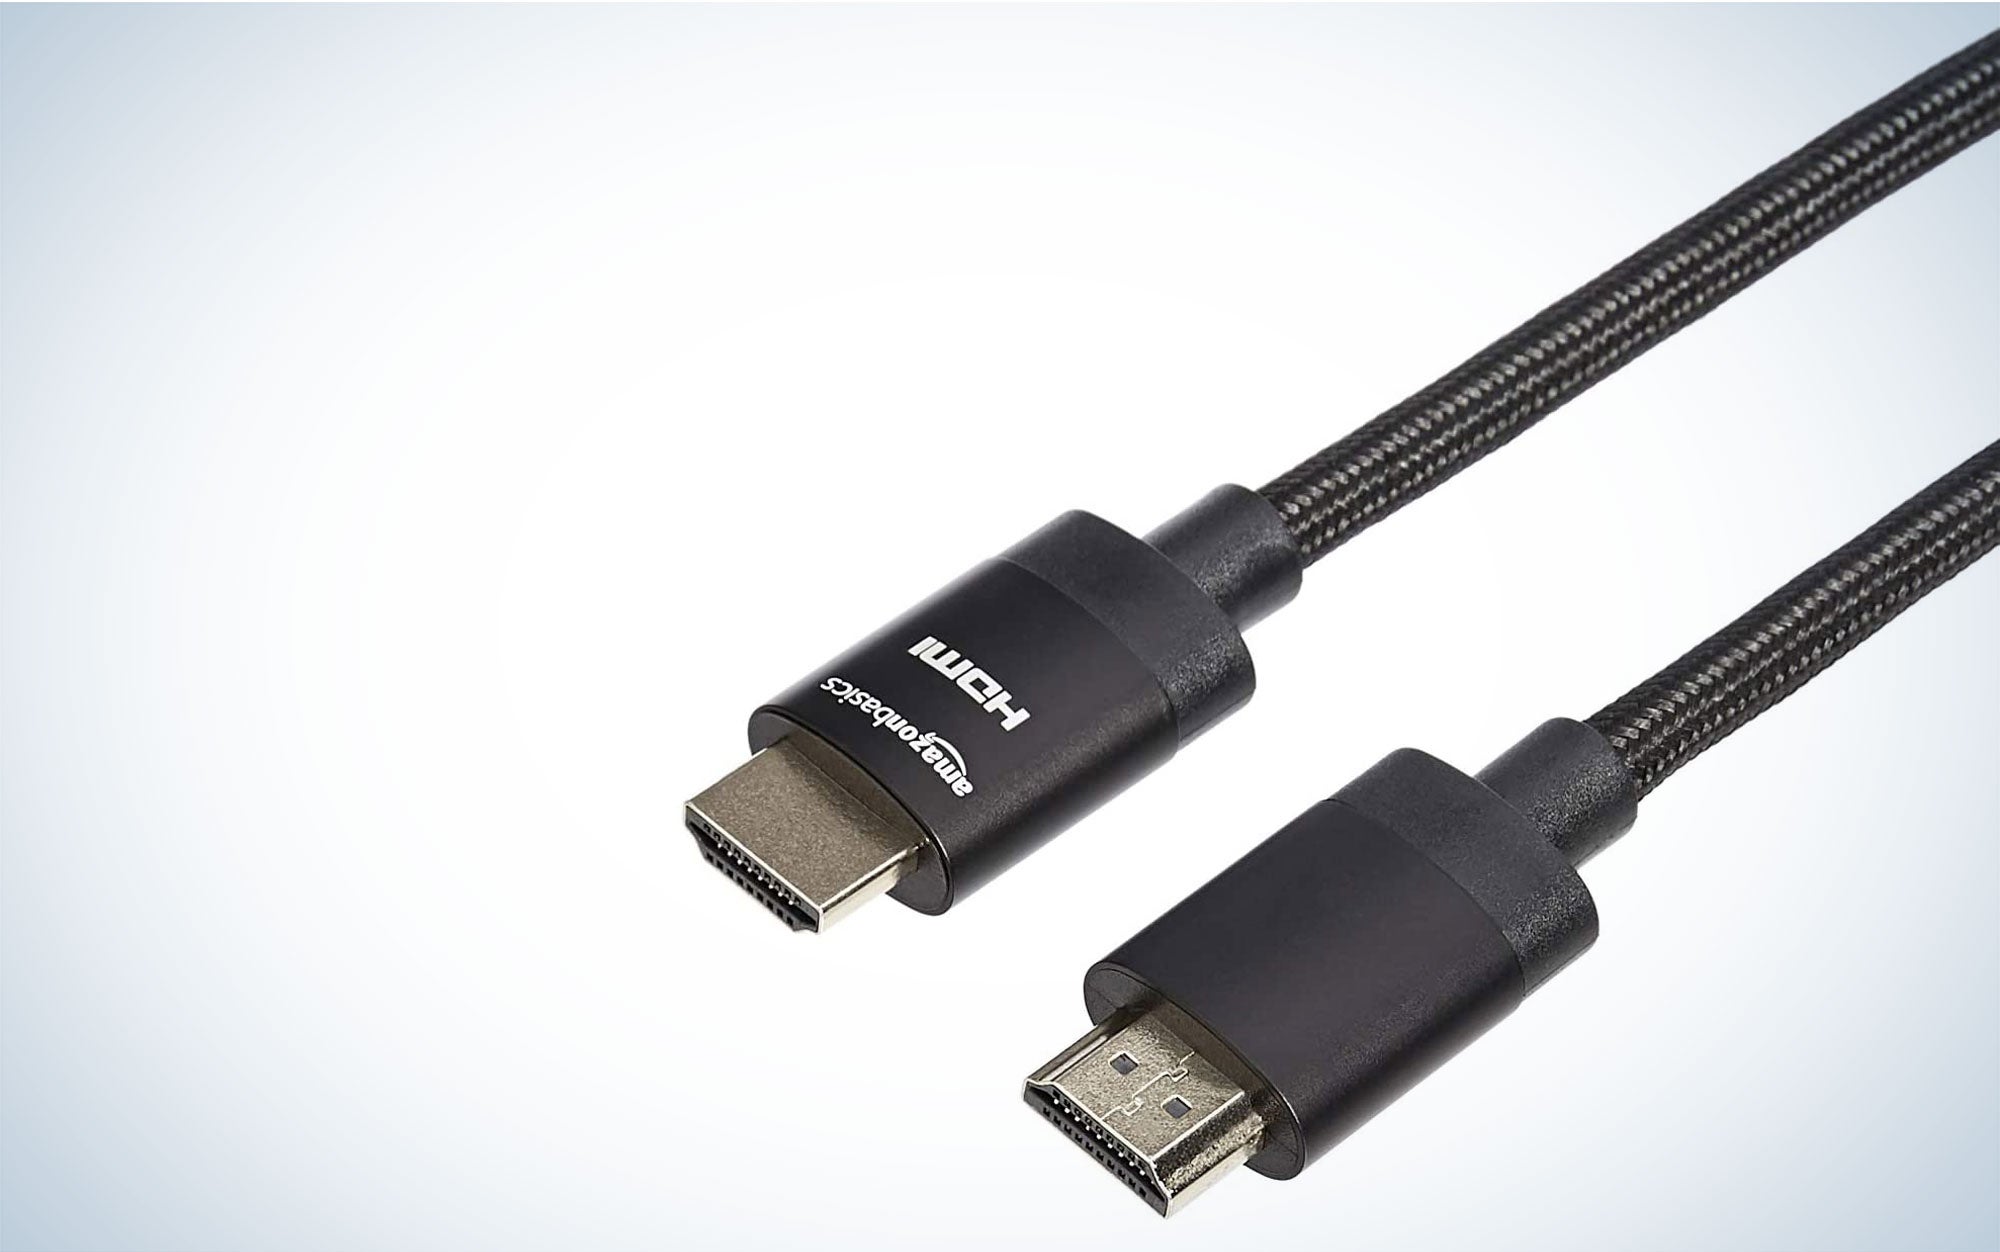 Amazon Basics is the best HDMI cable.